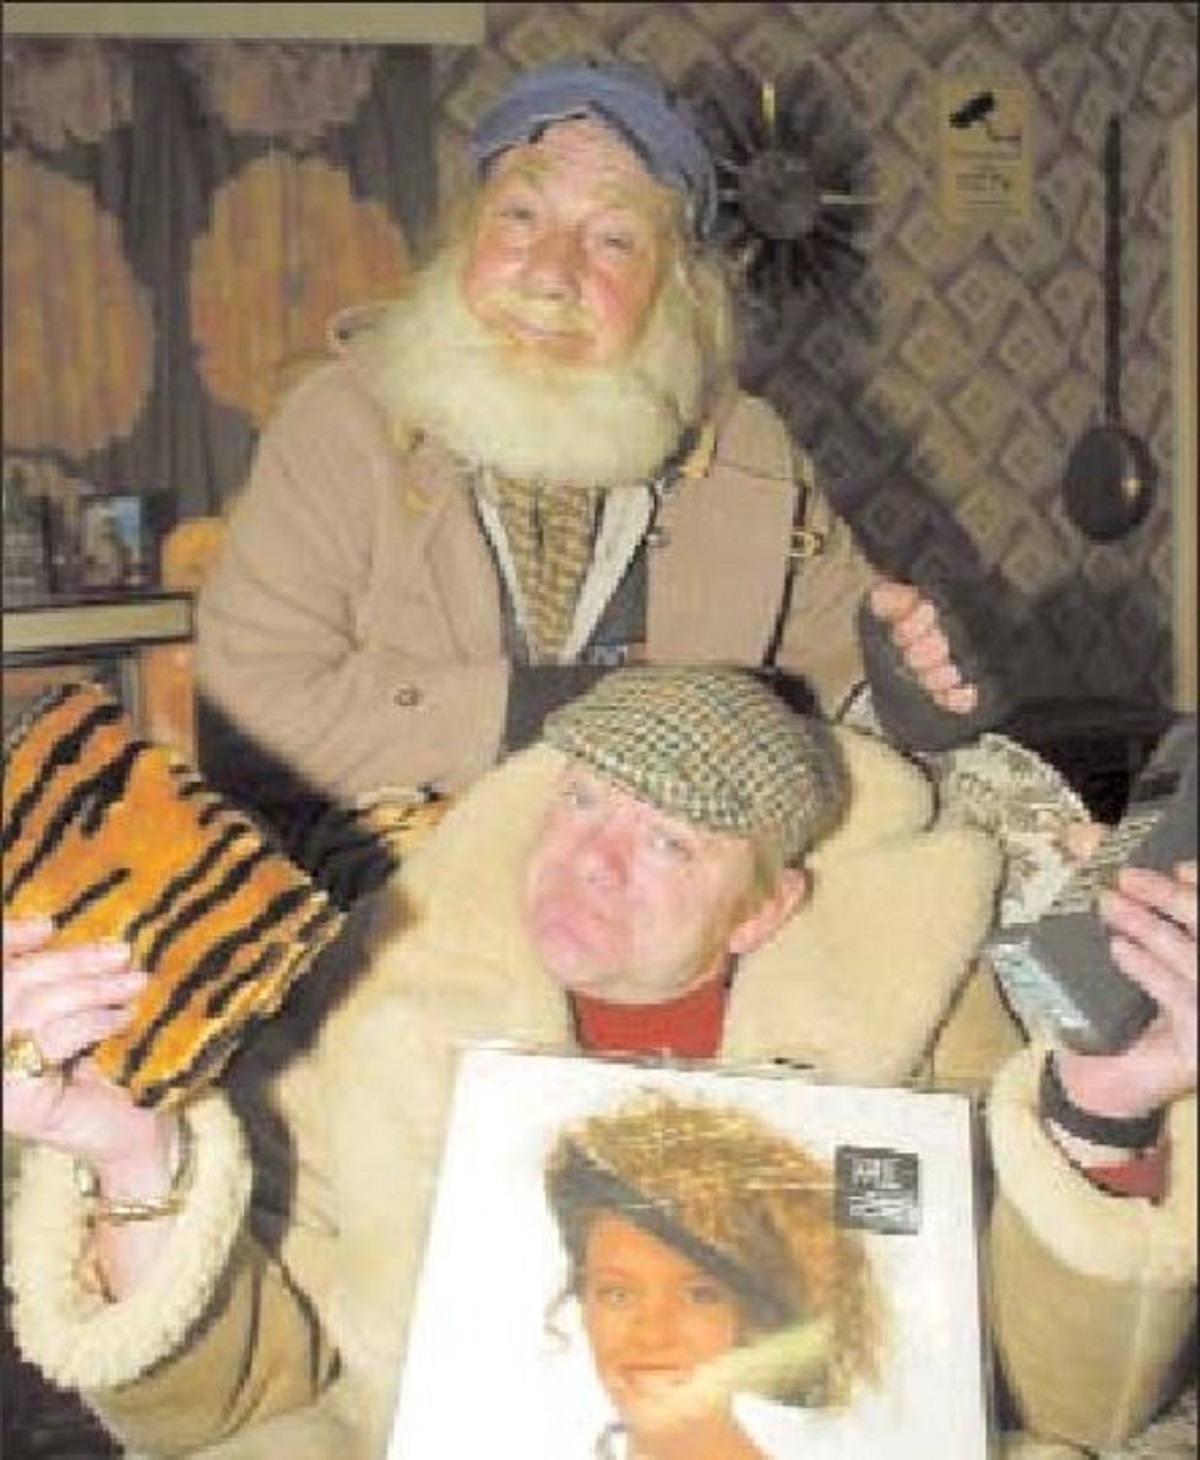 Seeing double - these lookalikes posed as Del Boy and Uncle Albert